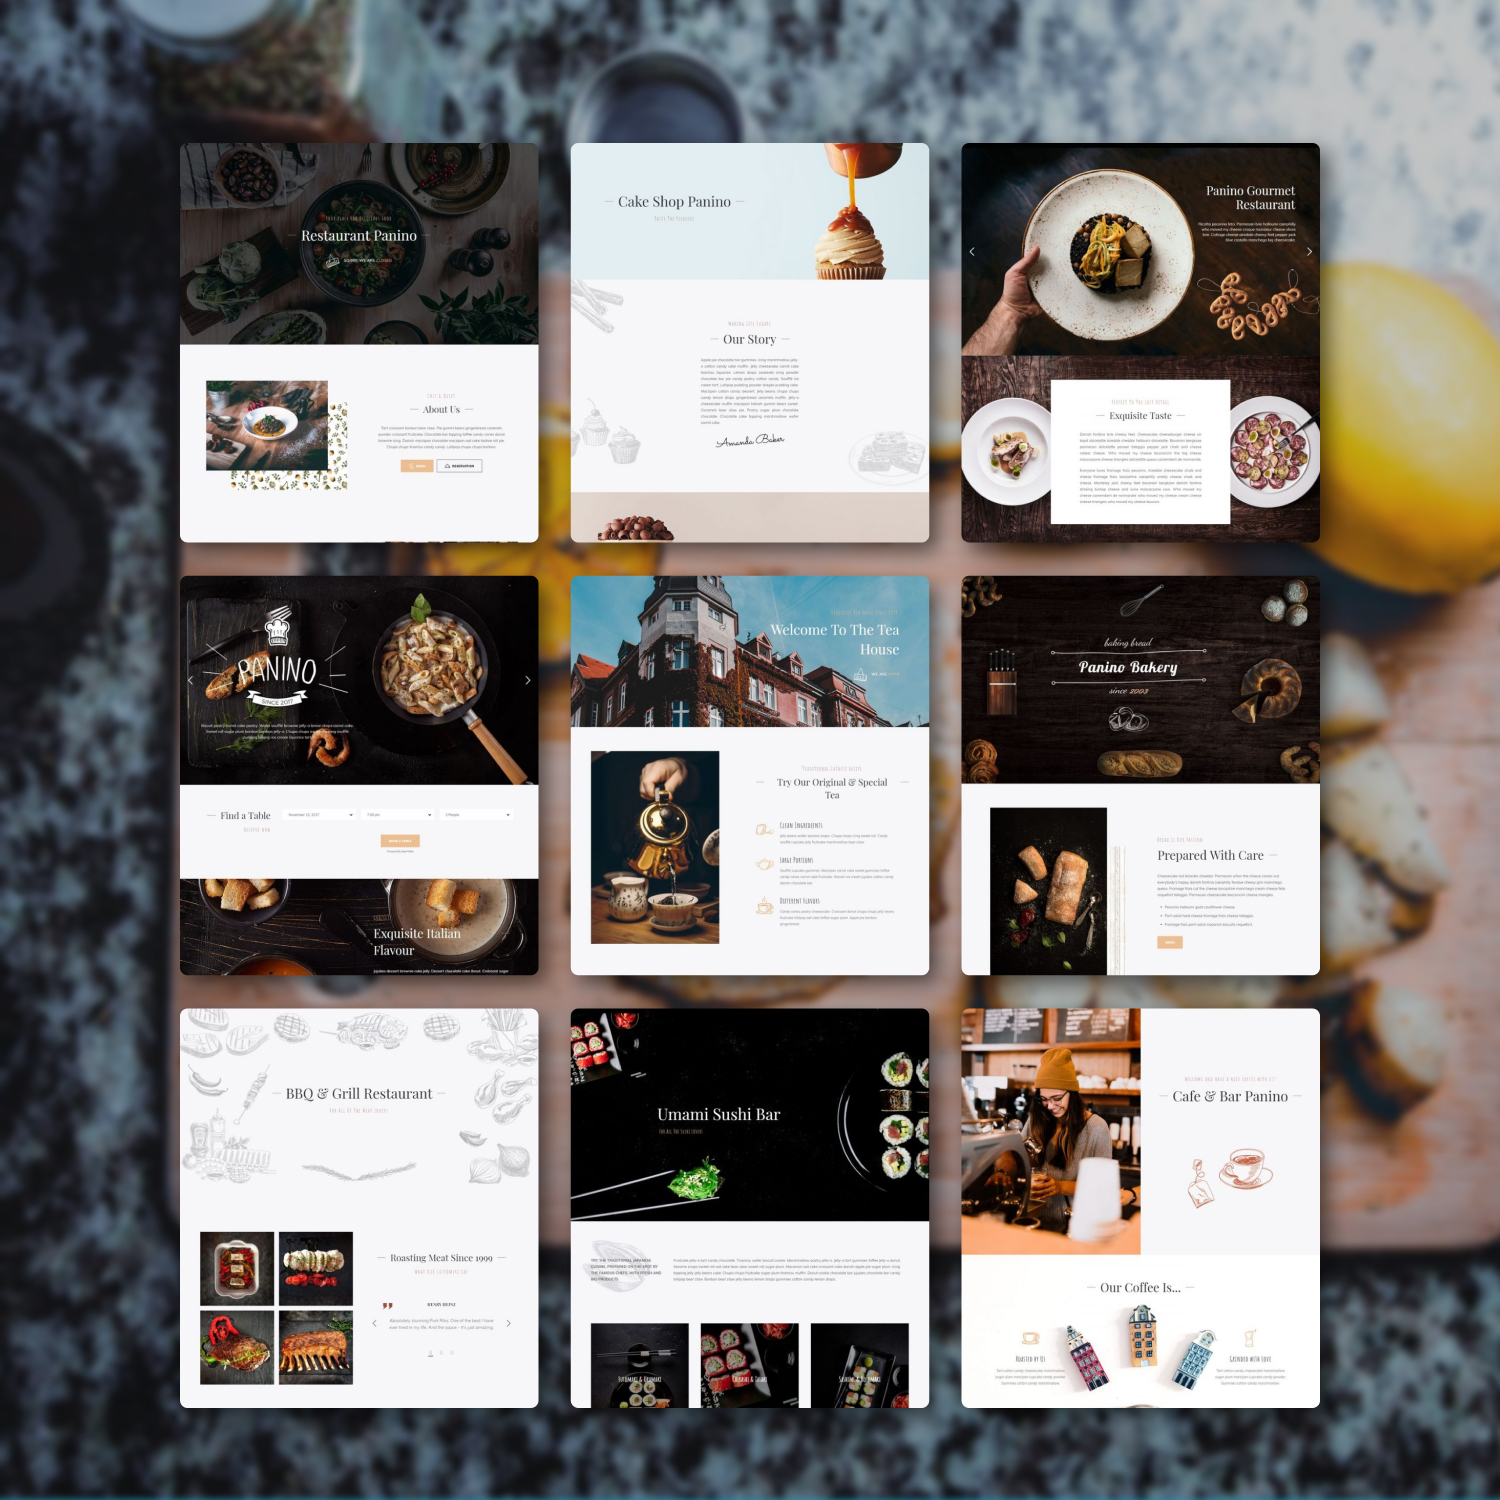 Preview panino a modern restaurant and cafe wordpress theme.